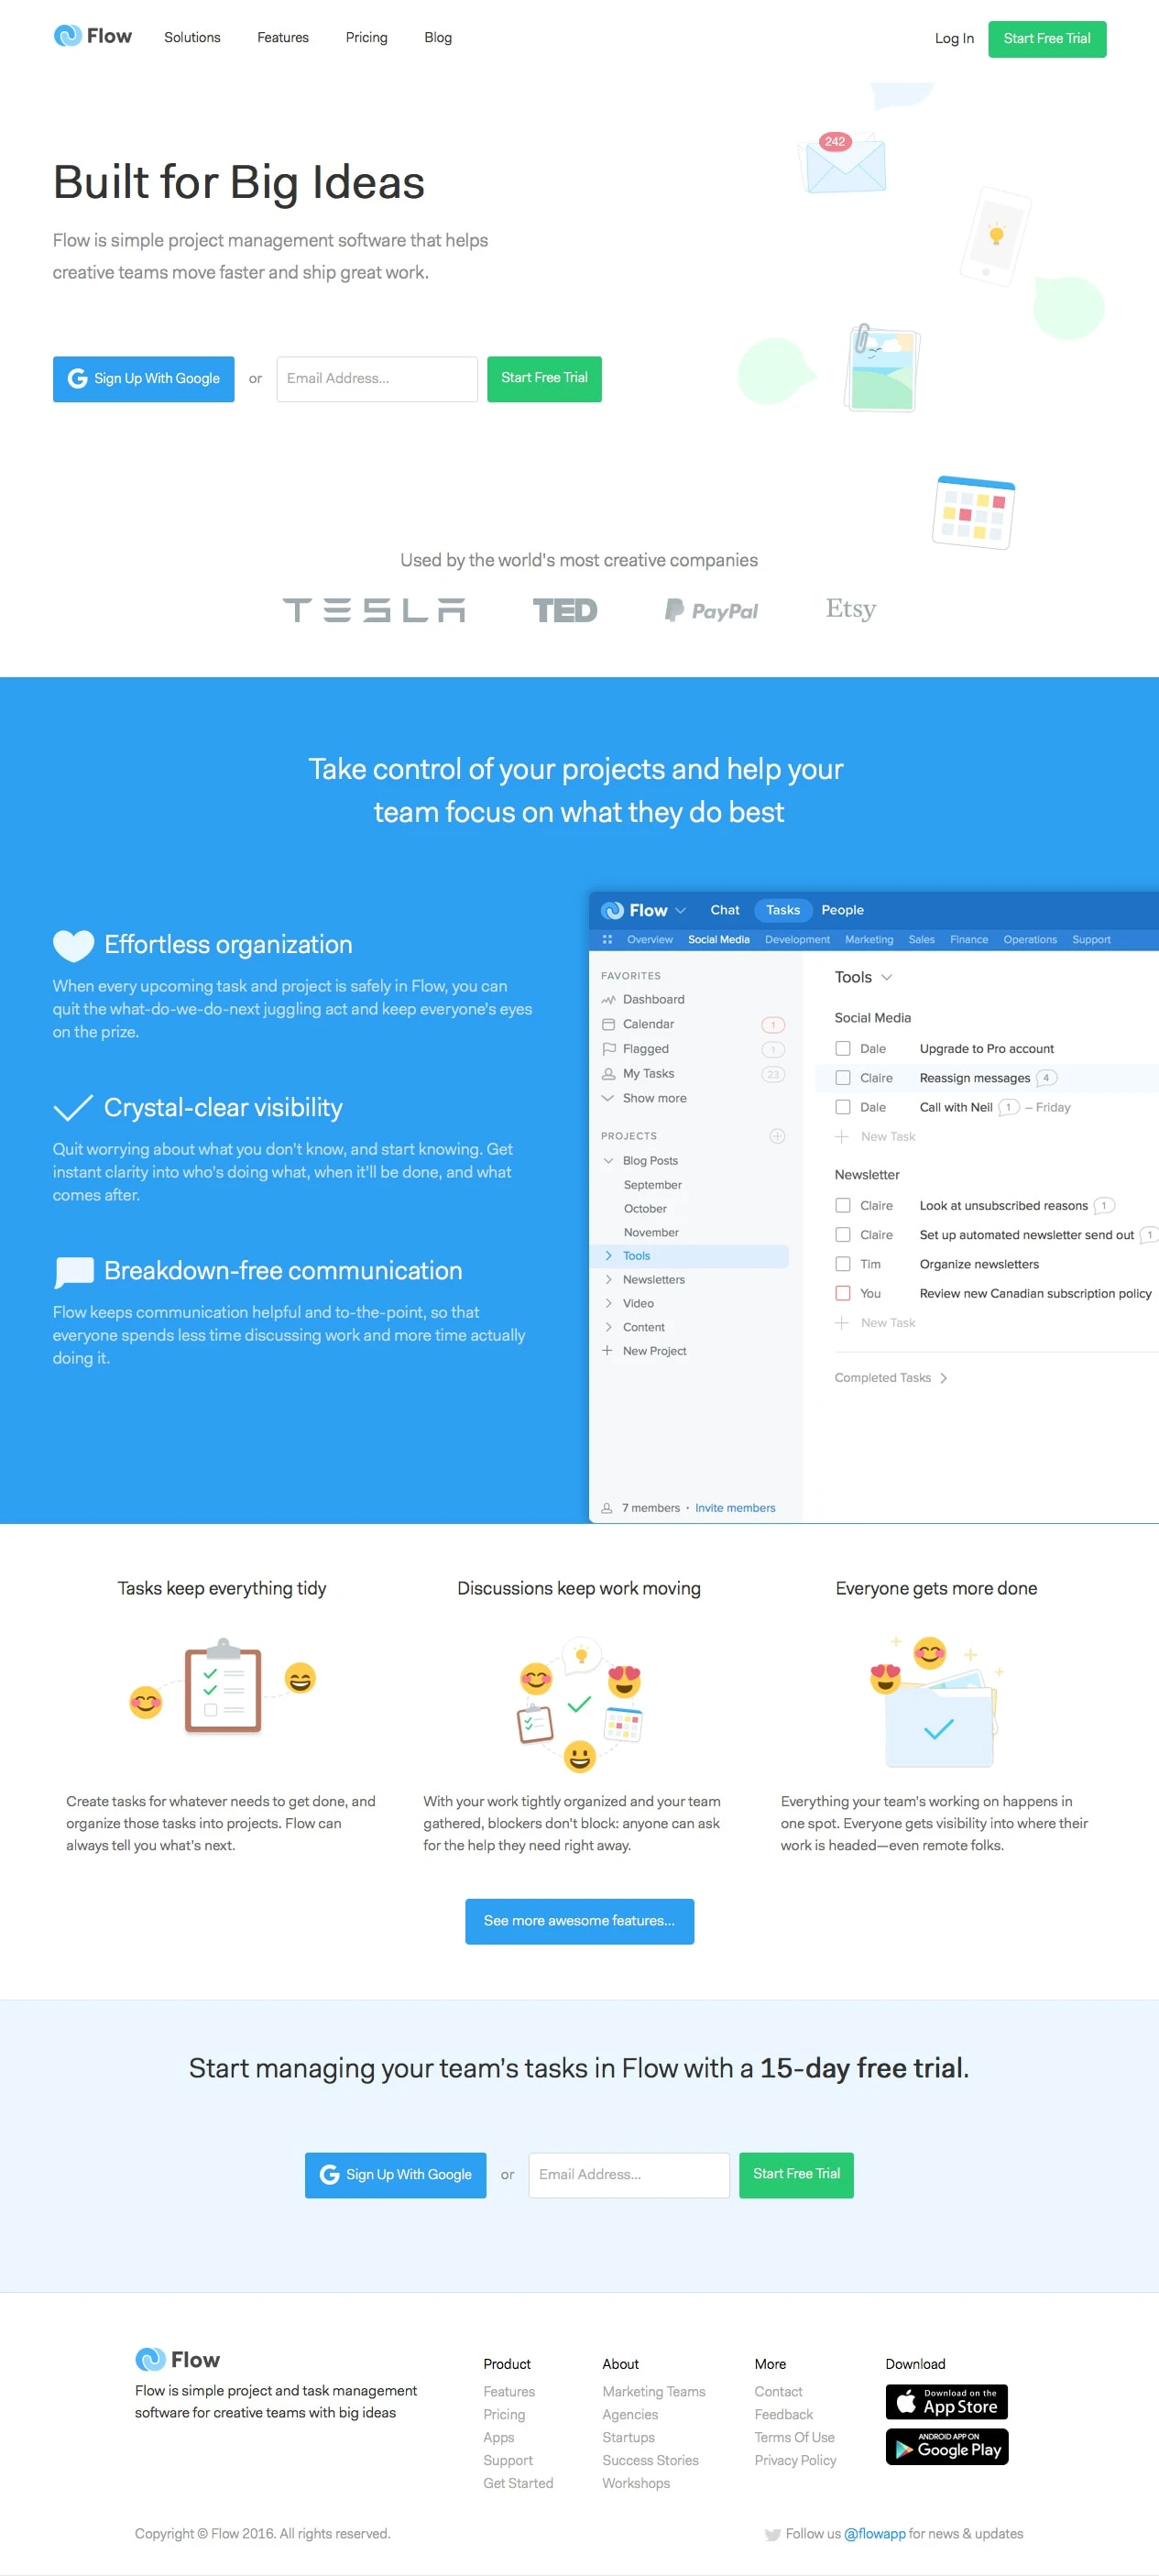 Flow Landing Page Example: Flow is simple project management software that helps creative teams move faster and ship great work.